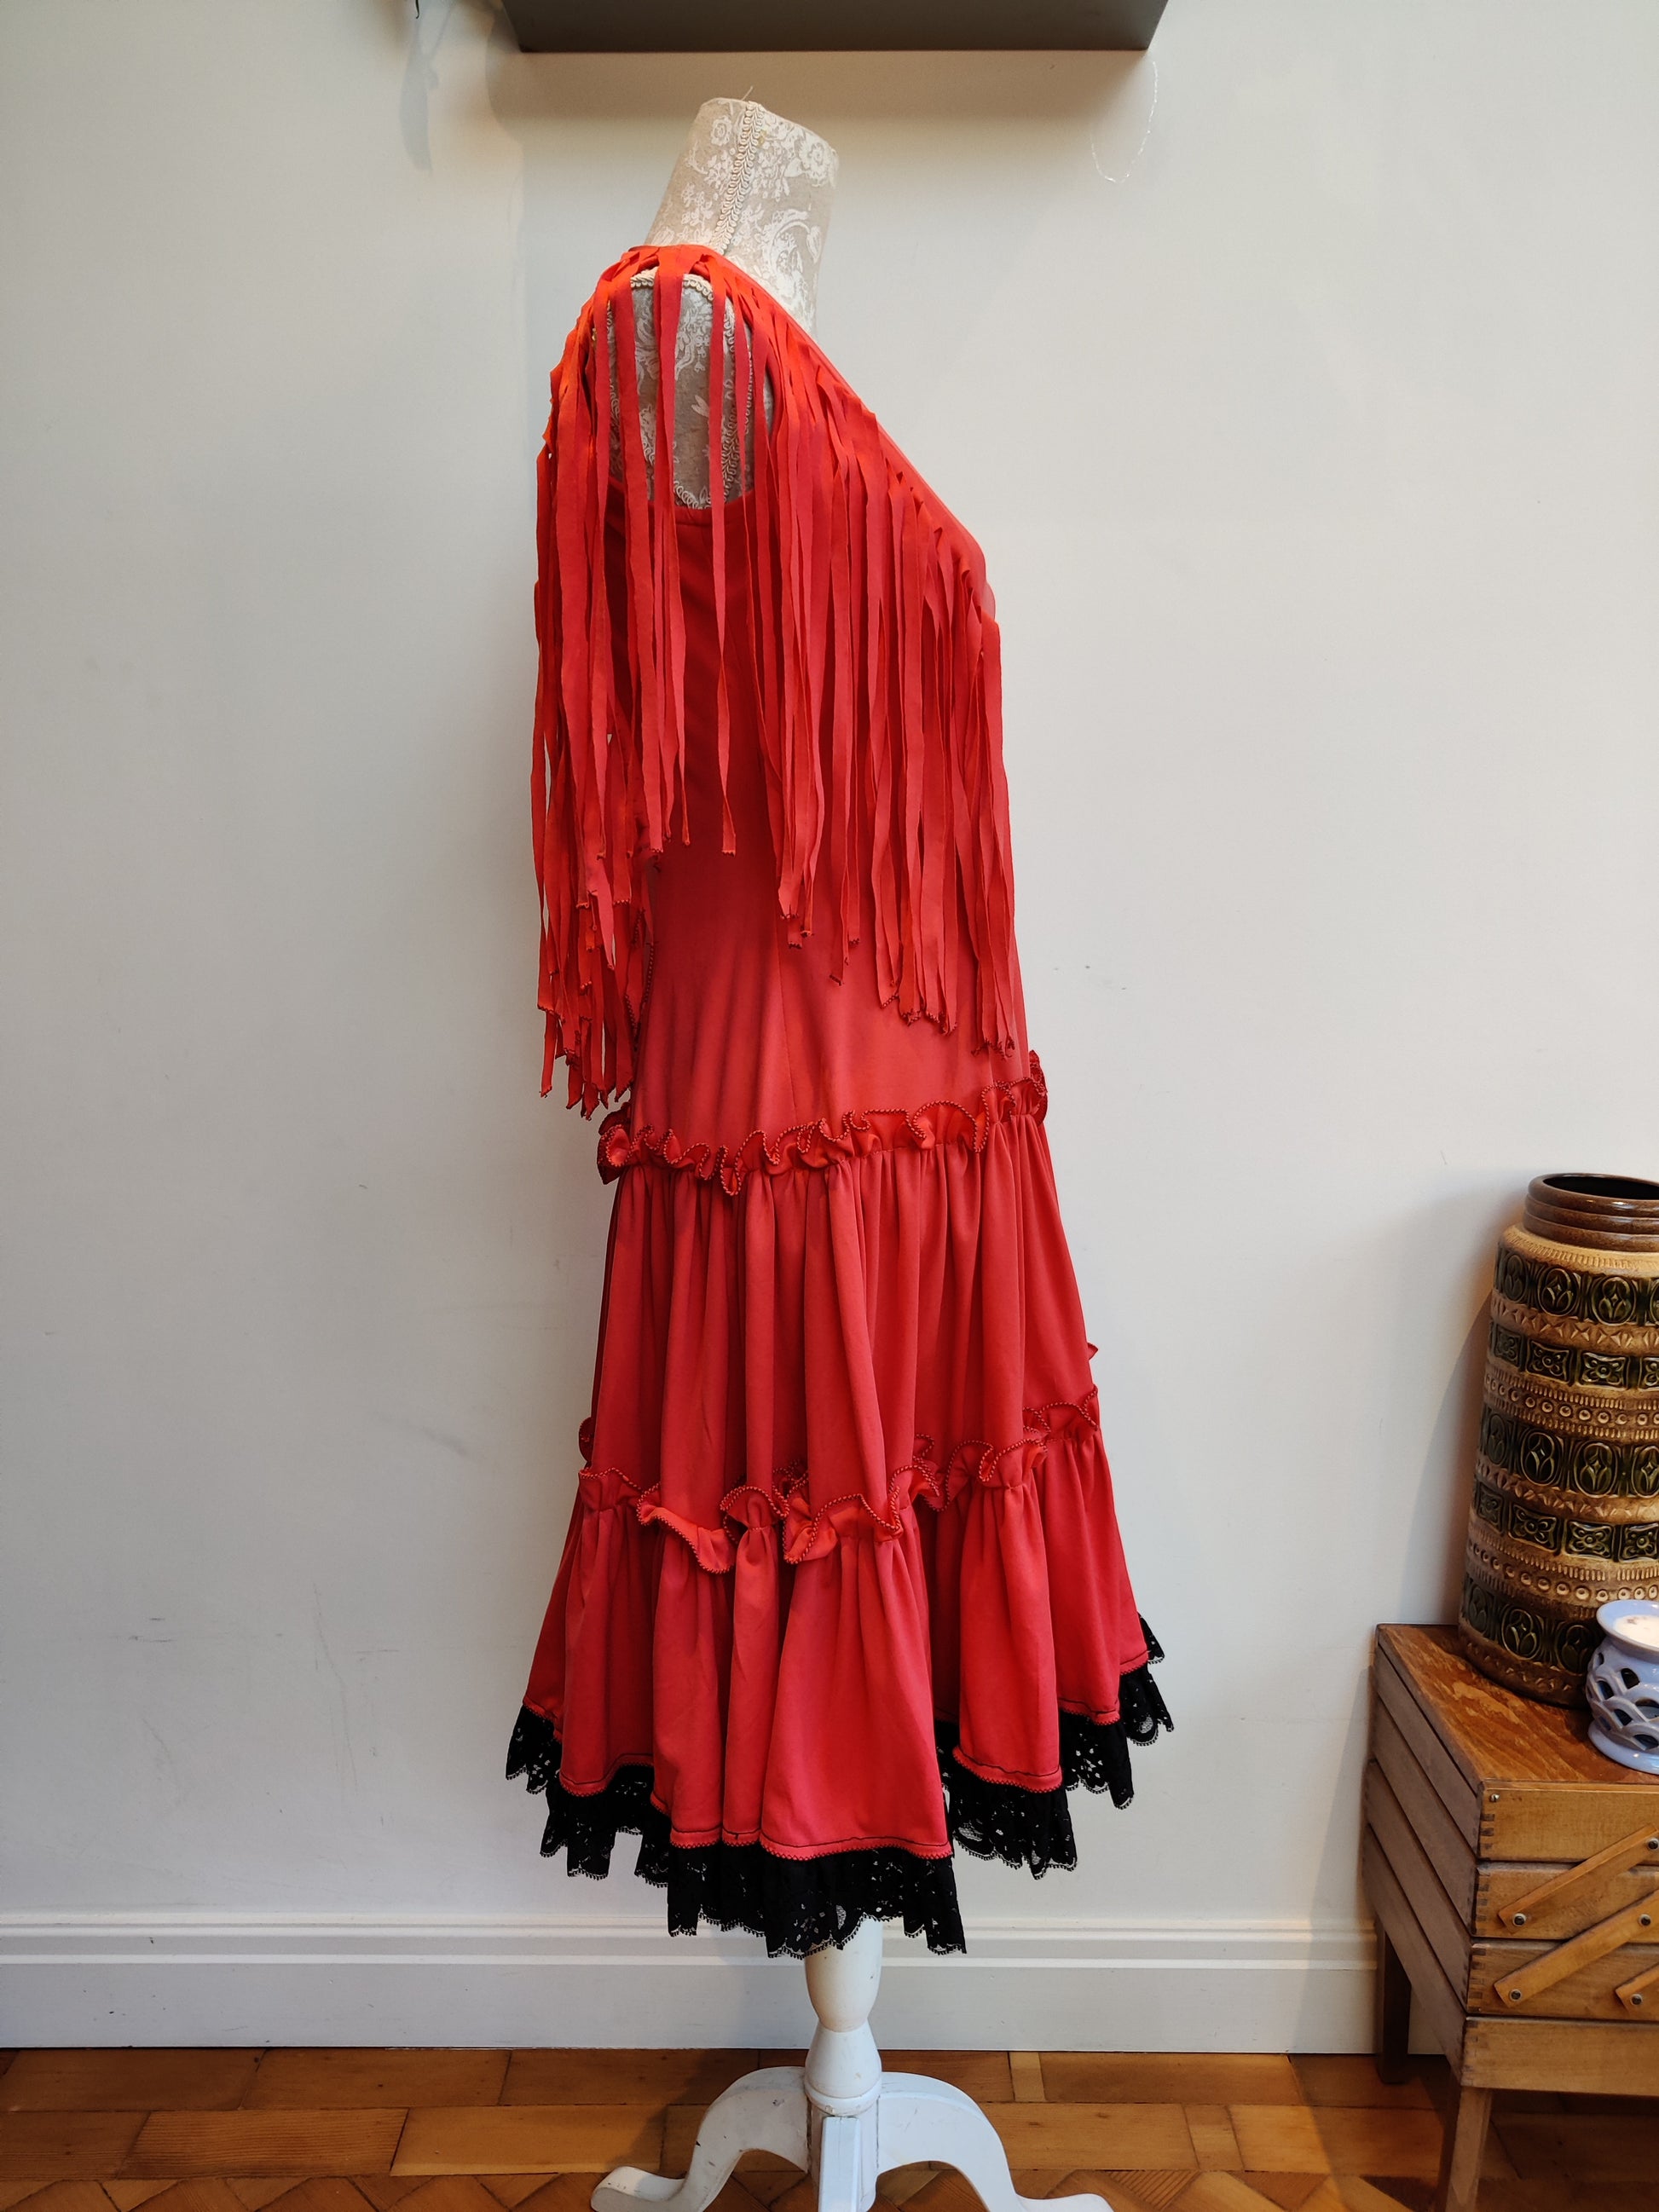 Red tassel dress with tiered lace detail